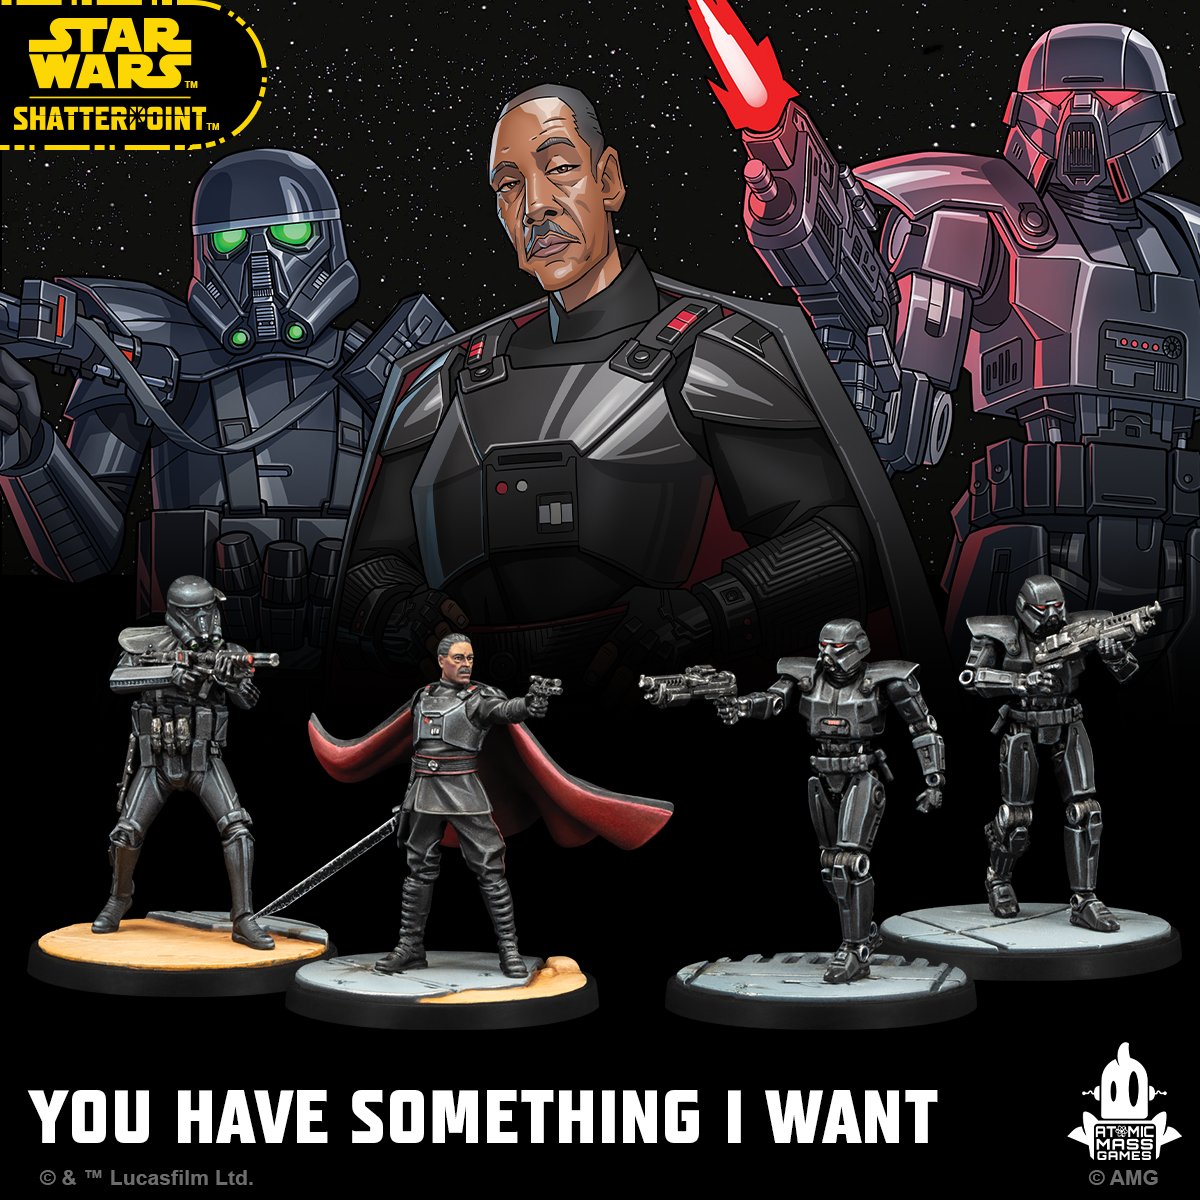 The You Have Something I Want Squad Pack for STAR WARS: Shatterpoint arrives in friendly local game stores soon! Who’s picking one up? ow.ly/zI0Y50R4YZt